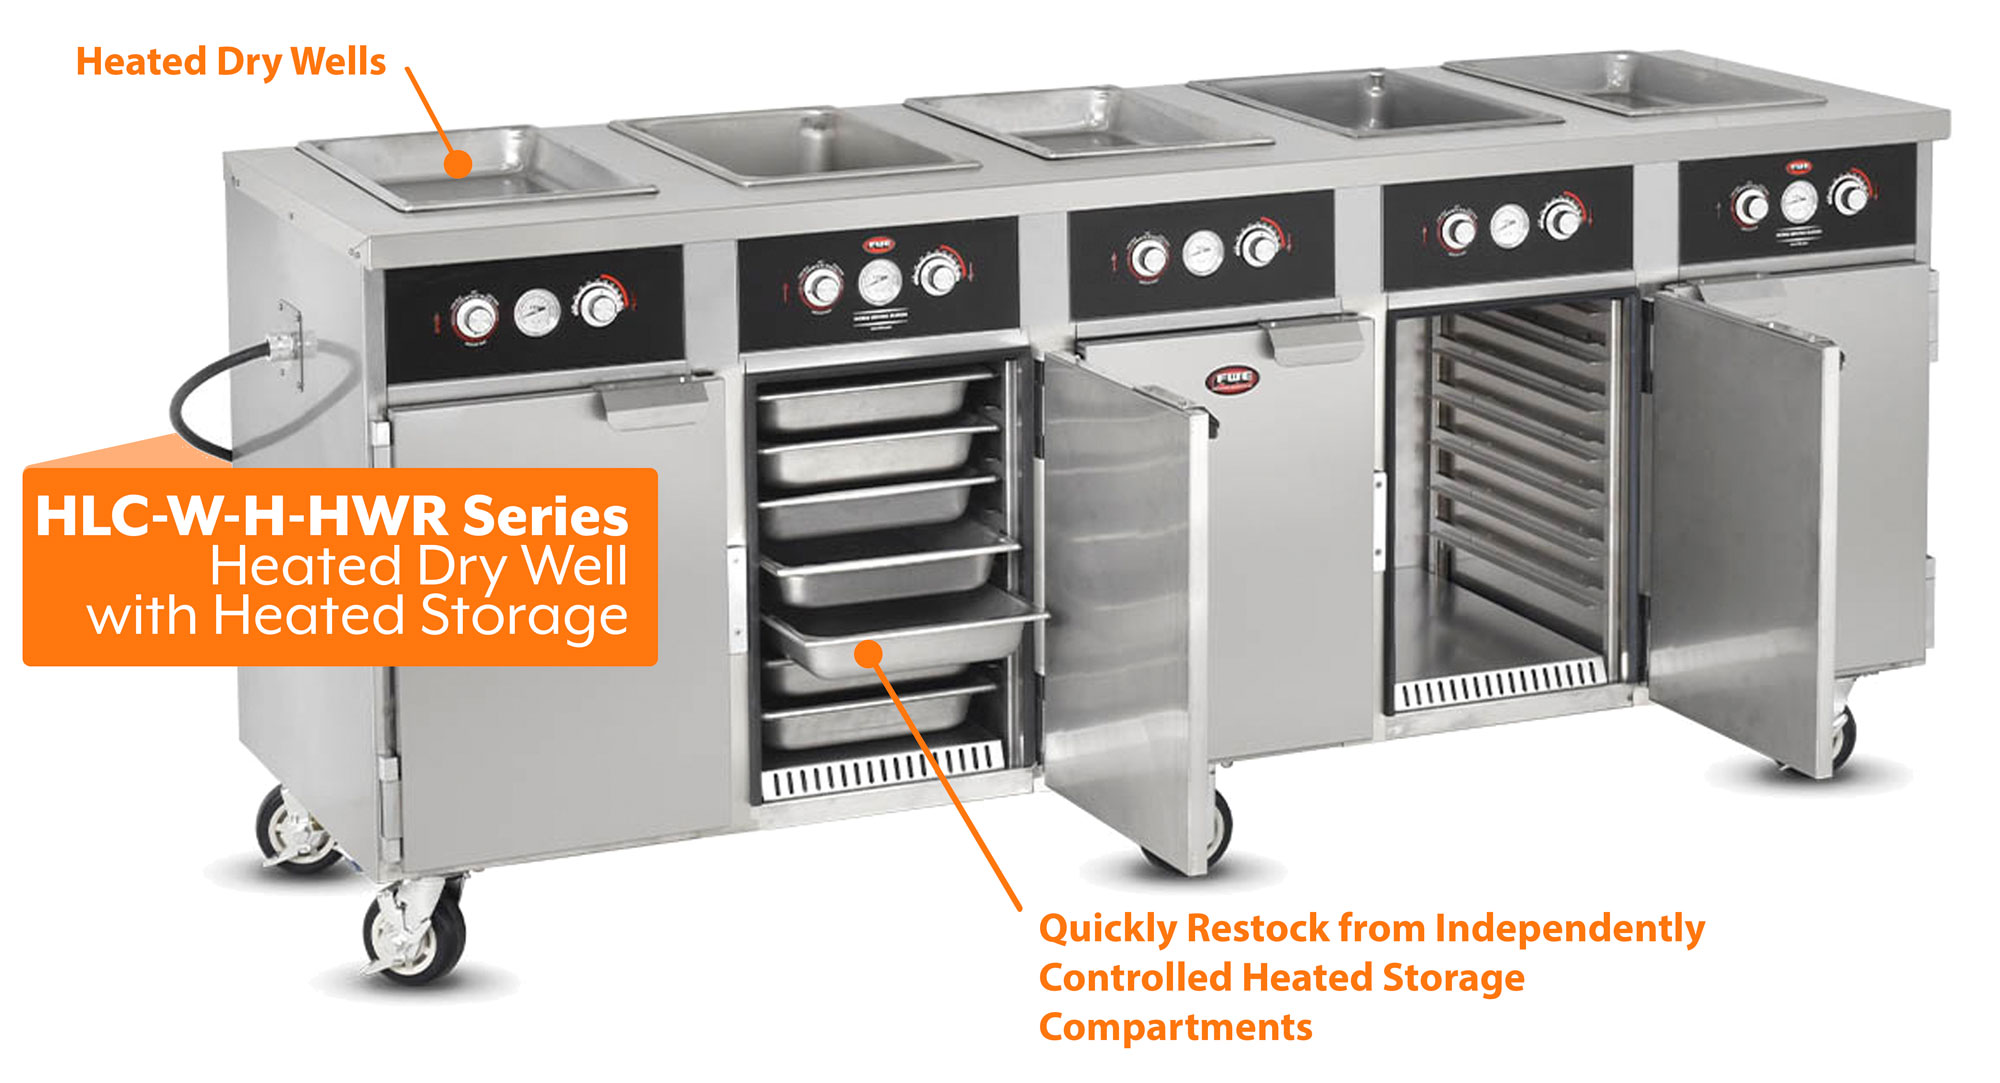 HLC-W-H-HWR Series: Heated Dry Serving Well with Independently Controlled Heated Storage Below